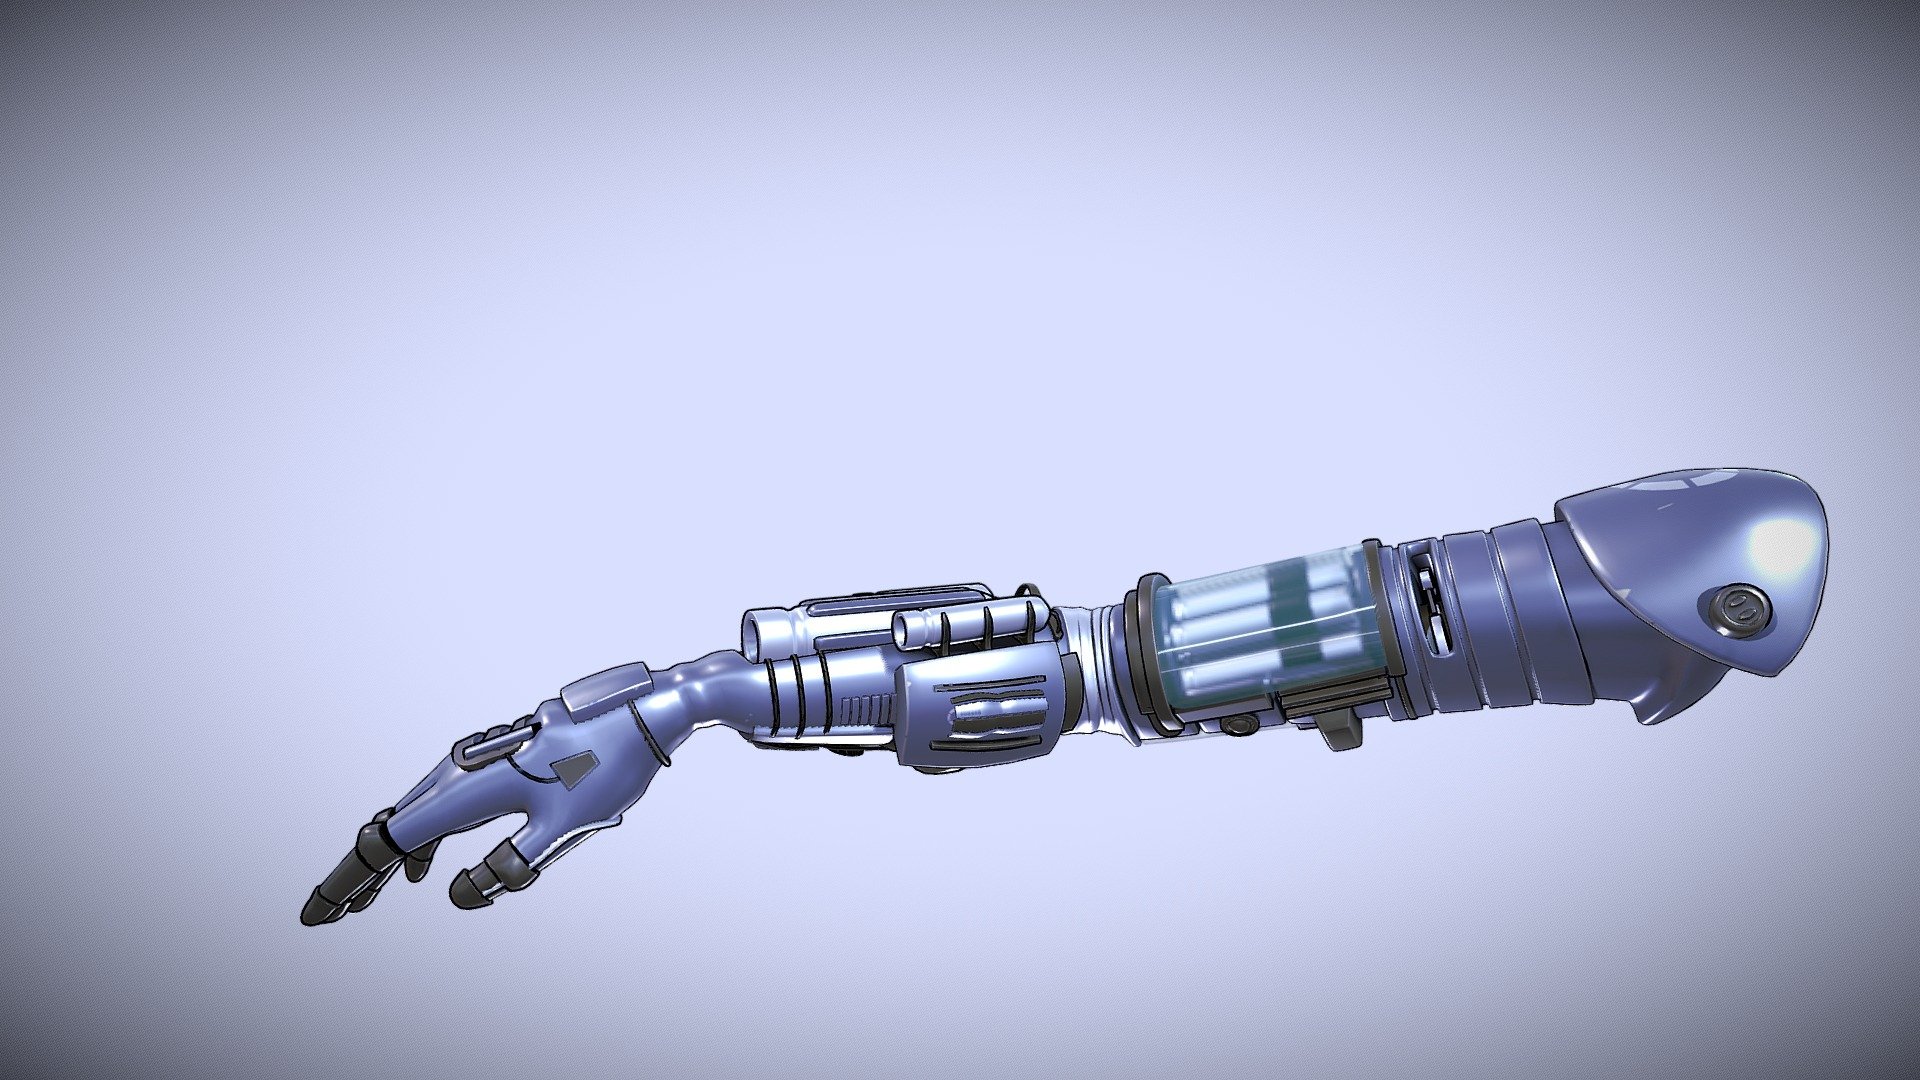 Mecha Arm, rigged and animated, toon shader.
UV Unwrapped and textured. 
Comes with textures at 2k and 4k resolution. 

The model contains 9 objects, 2 sets of materials, and 1 set of textures. 
Modeled in Blender, painted in Substance Painter. 

Blend file before modifiers has 14.164 Faces, 27.856 Triangles, 15.107 Vertices.

.
My Gallery: https://edjan3d.wixsite.com/my-site - Mecha Arm - Buy Royalty Free 3D model by Ed (@Ed3D.Blend) 3d model